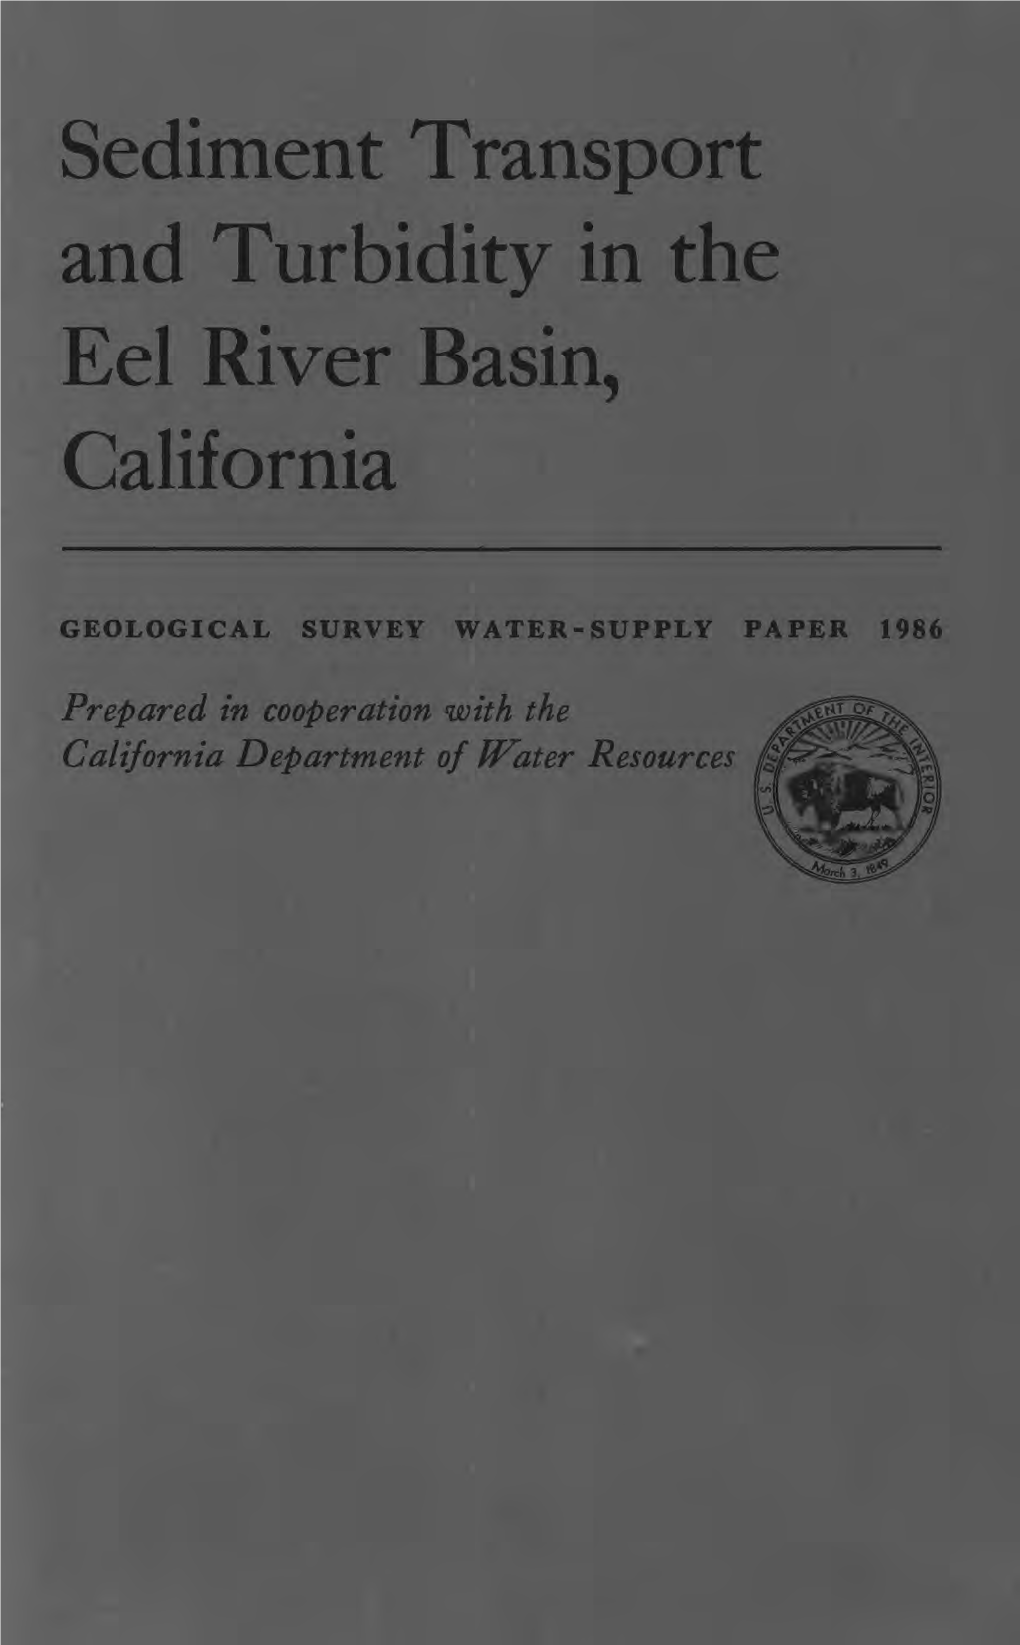 Sediment Transport and Turbidity in the Eel River Basin, California